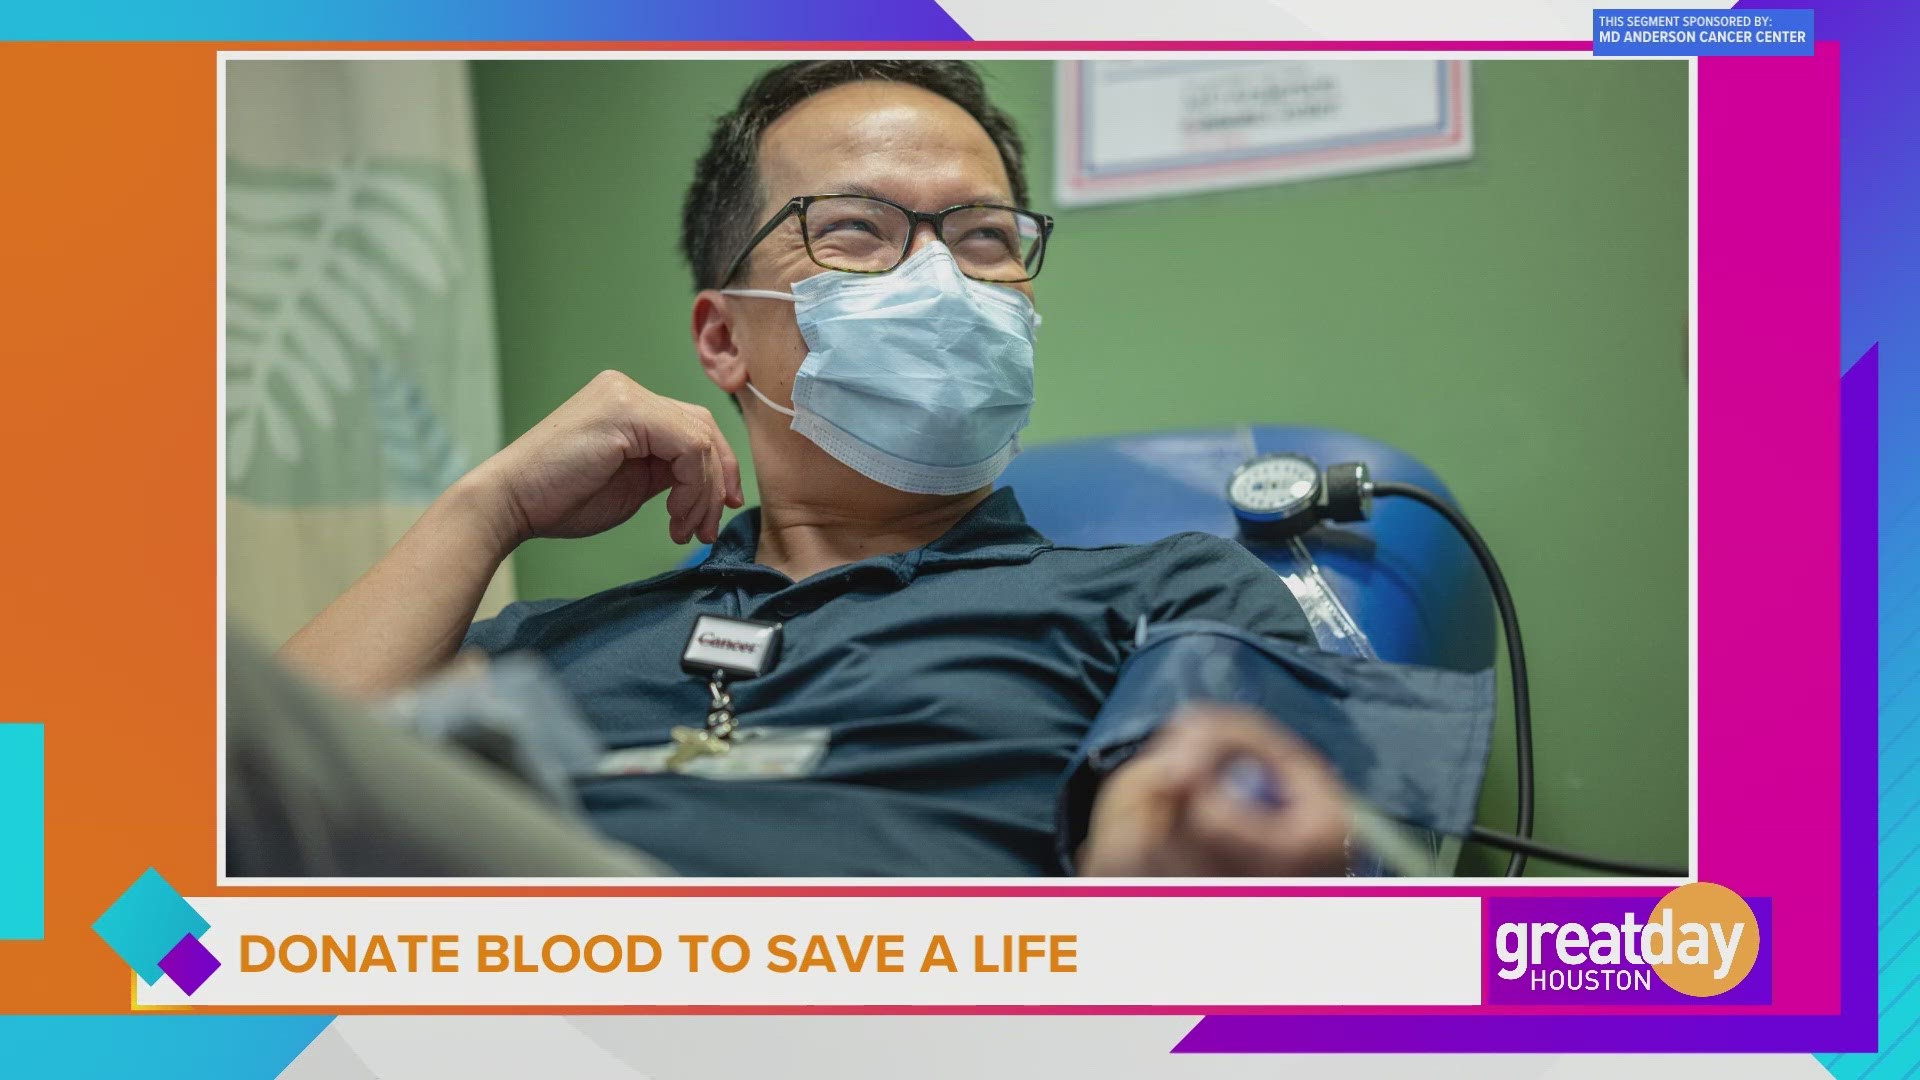 Donating blood or platelets is not only easy but has the potential to save up to three lives.